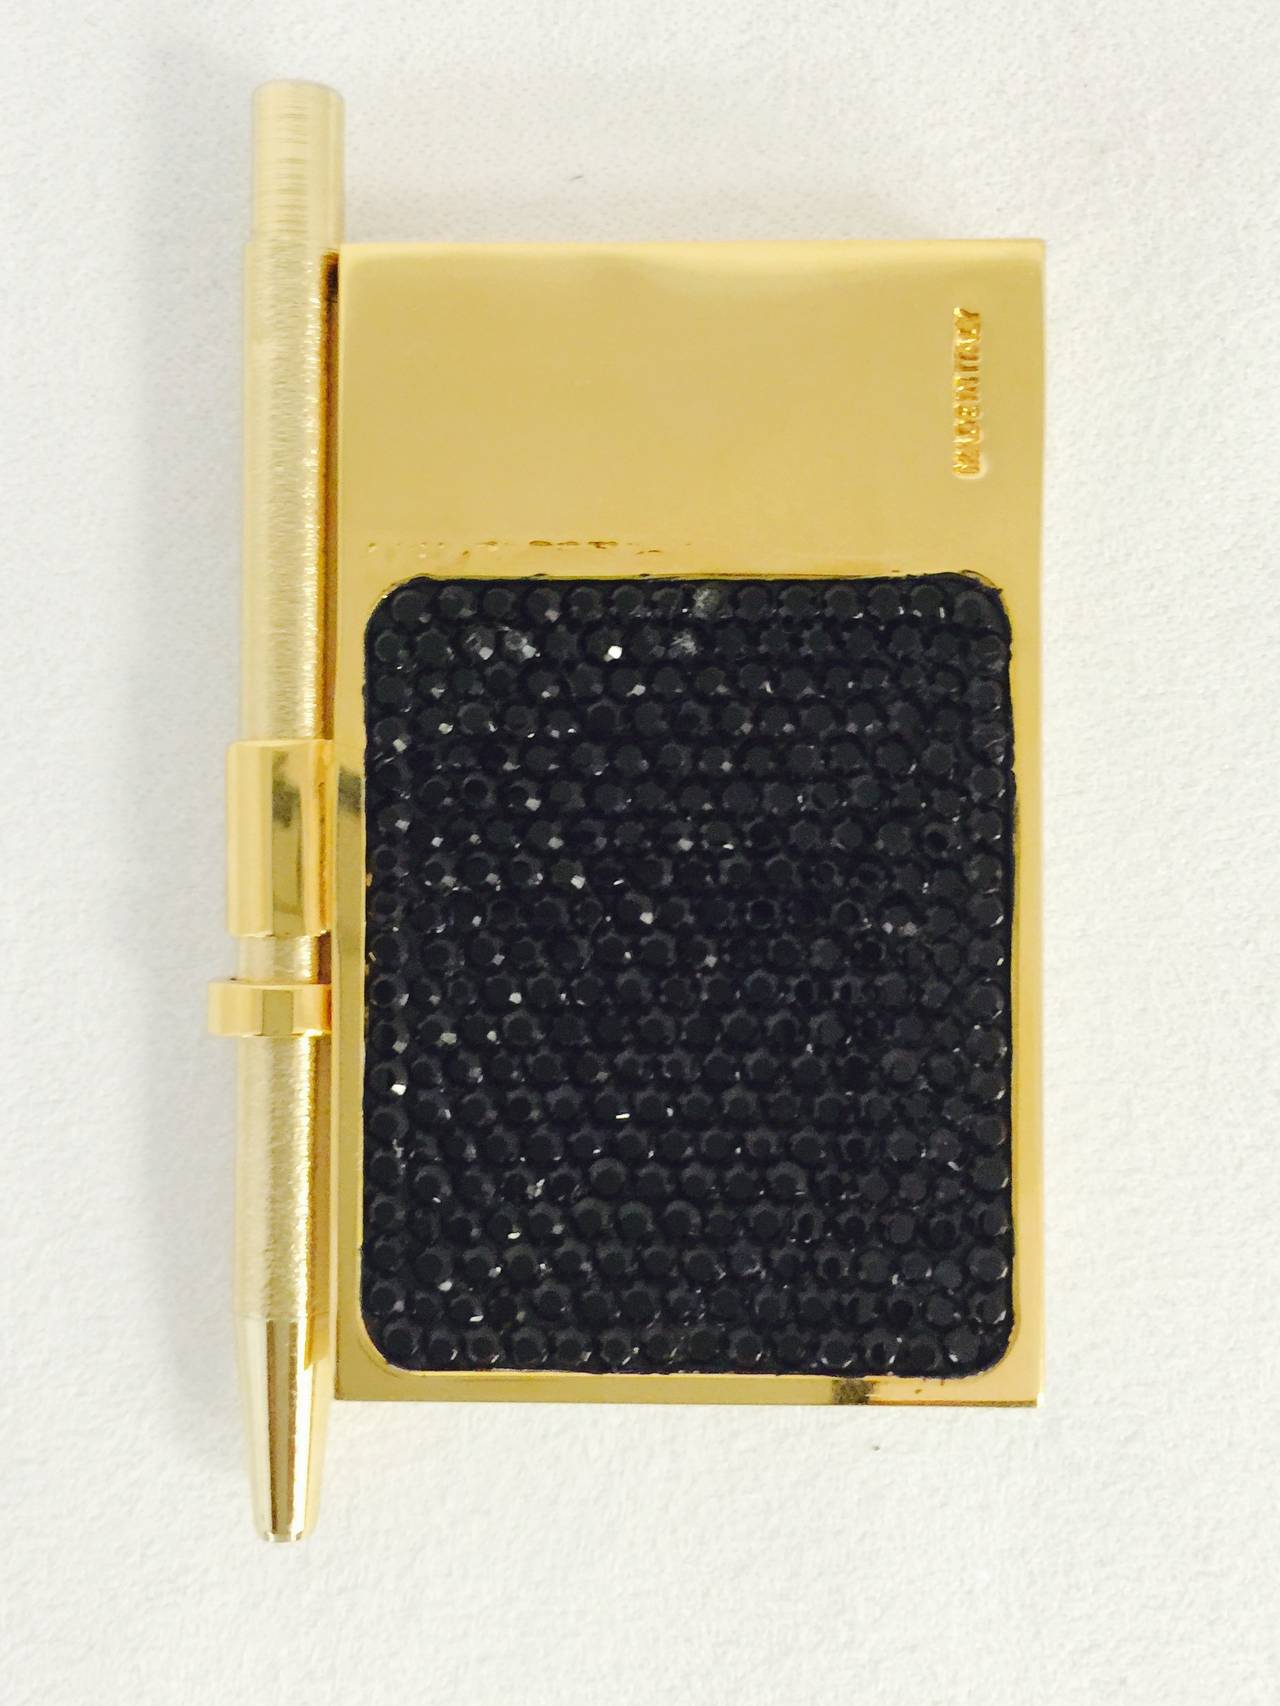 Take Note!  Only this Magnificent Swarovski Crystal Encrusted Mini Pad With Pen is worthy of Judith Leiber's minaudiere's or evening bags.  An ordinary pen and notepad simply will not suffice!  Features a glorious flower in full bloom on the front